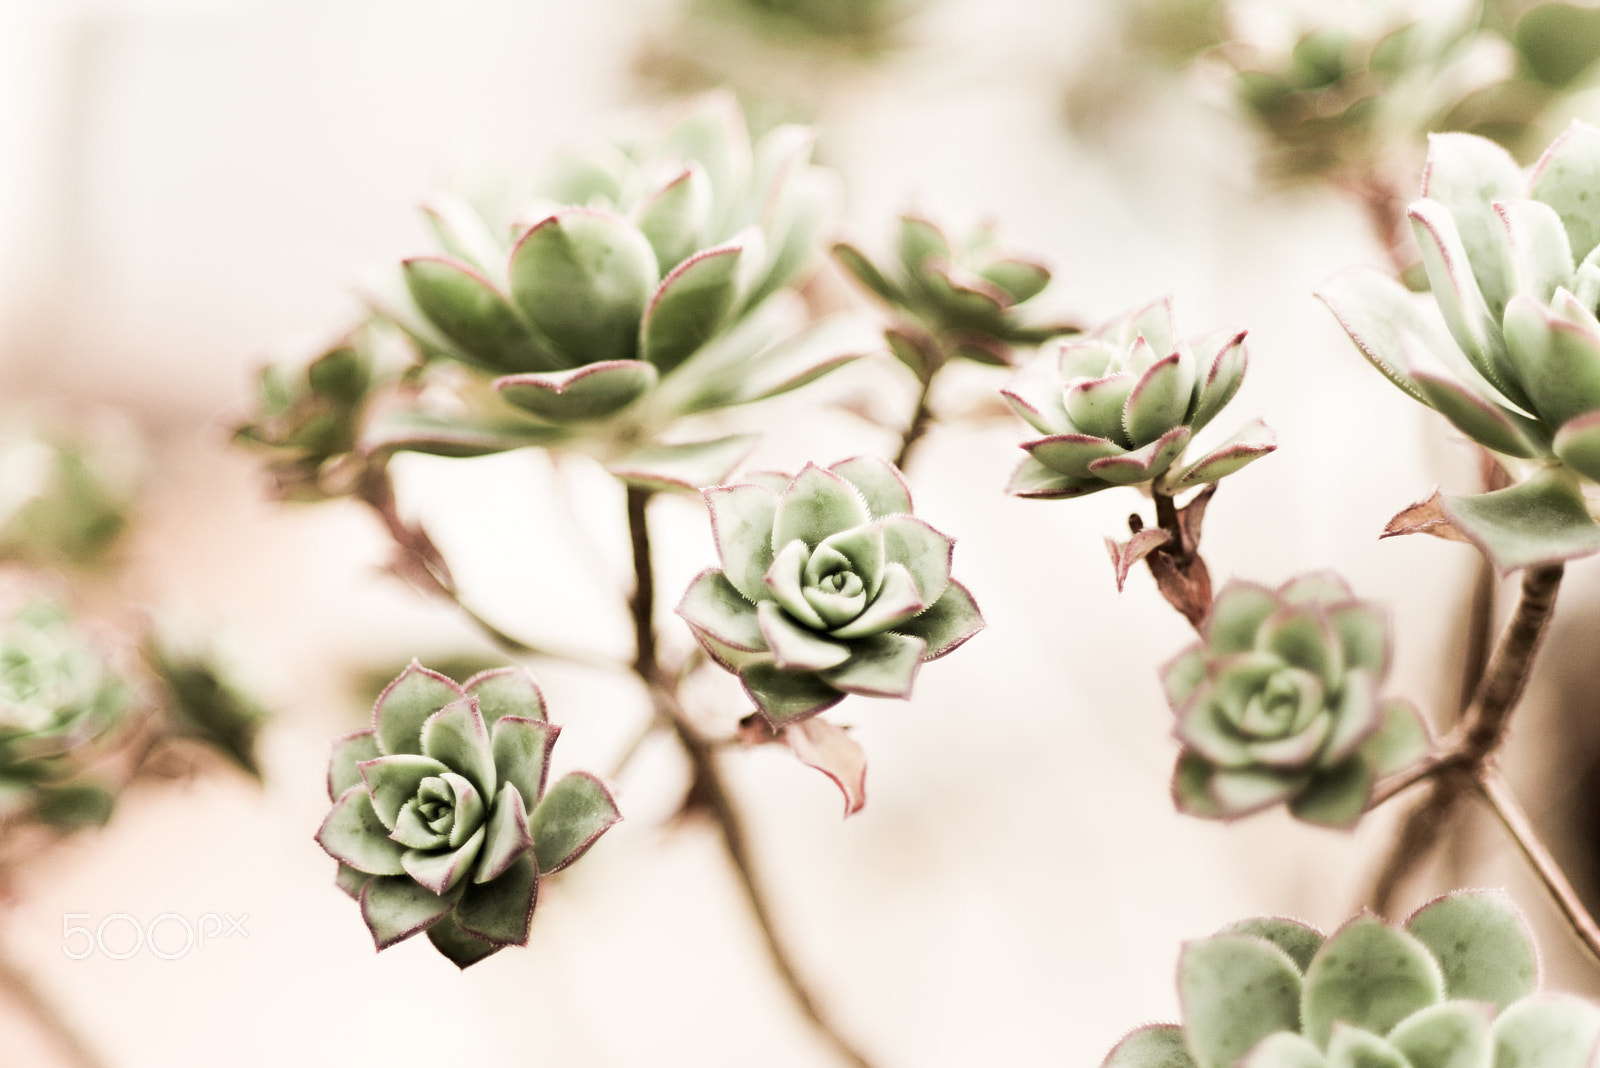 Pentax K-30 sample photo. More succulents photography